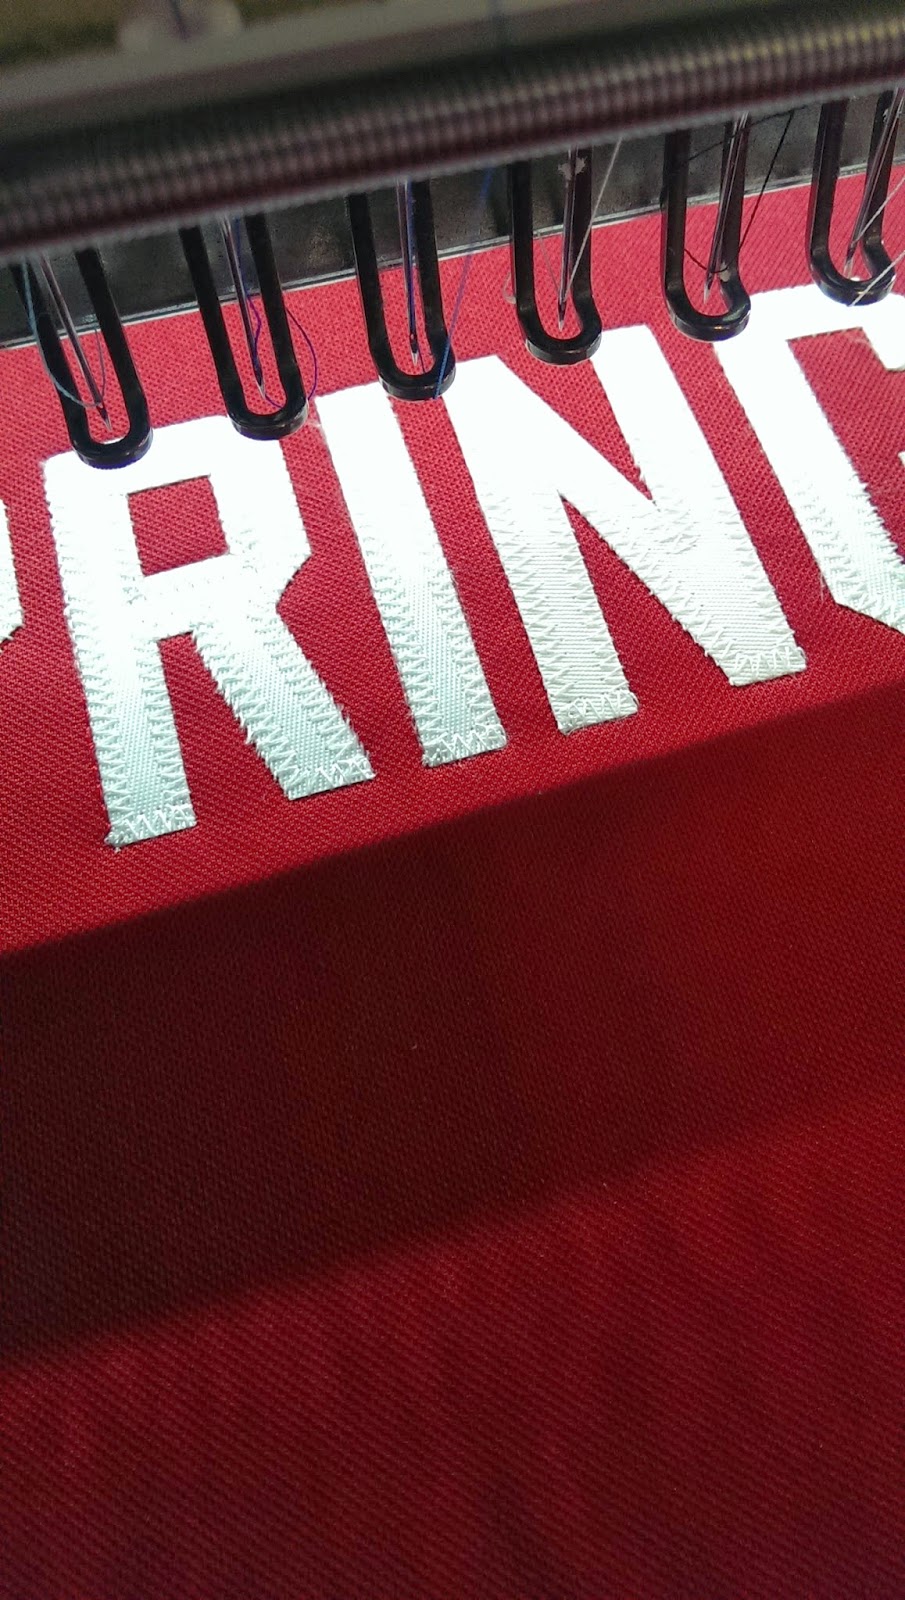 Stitched name on a jersey